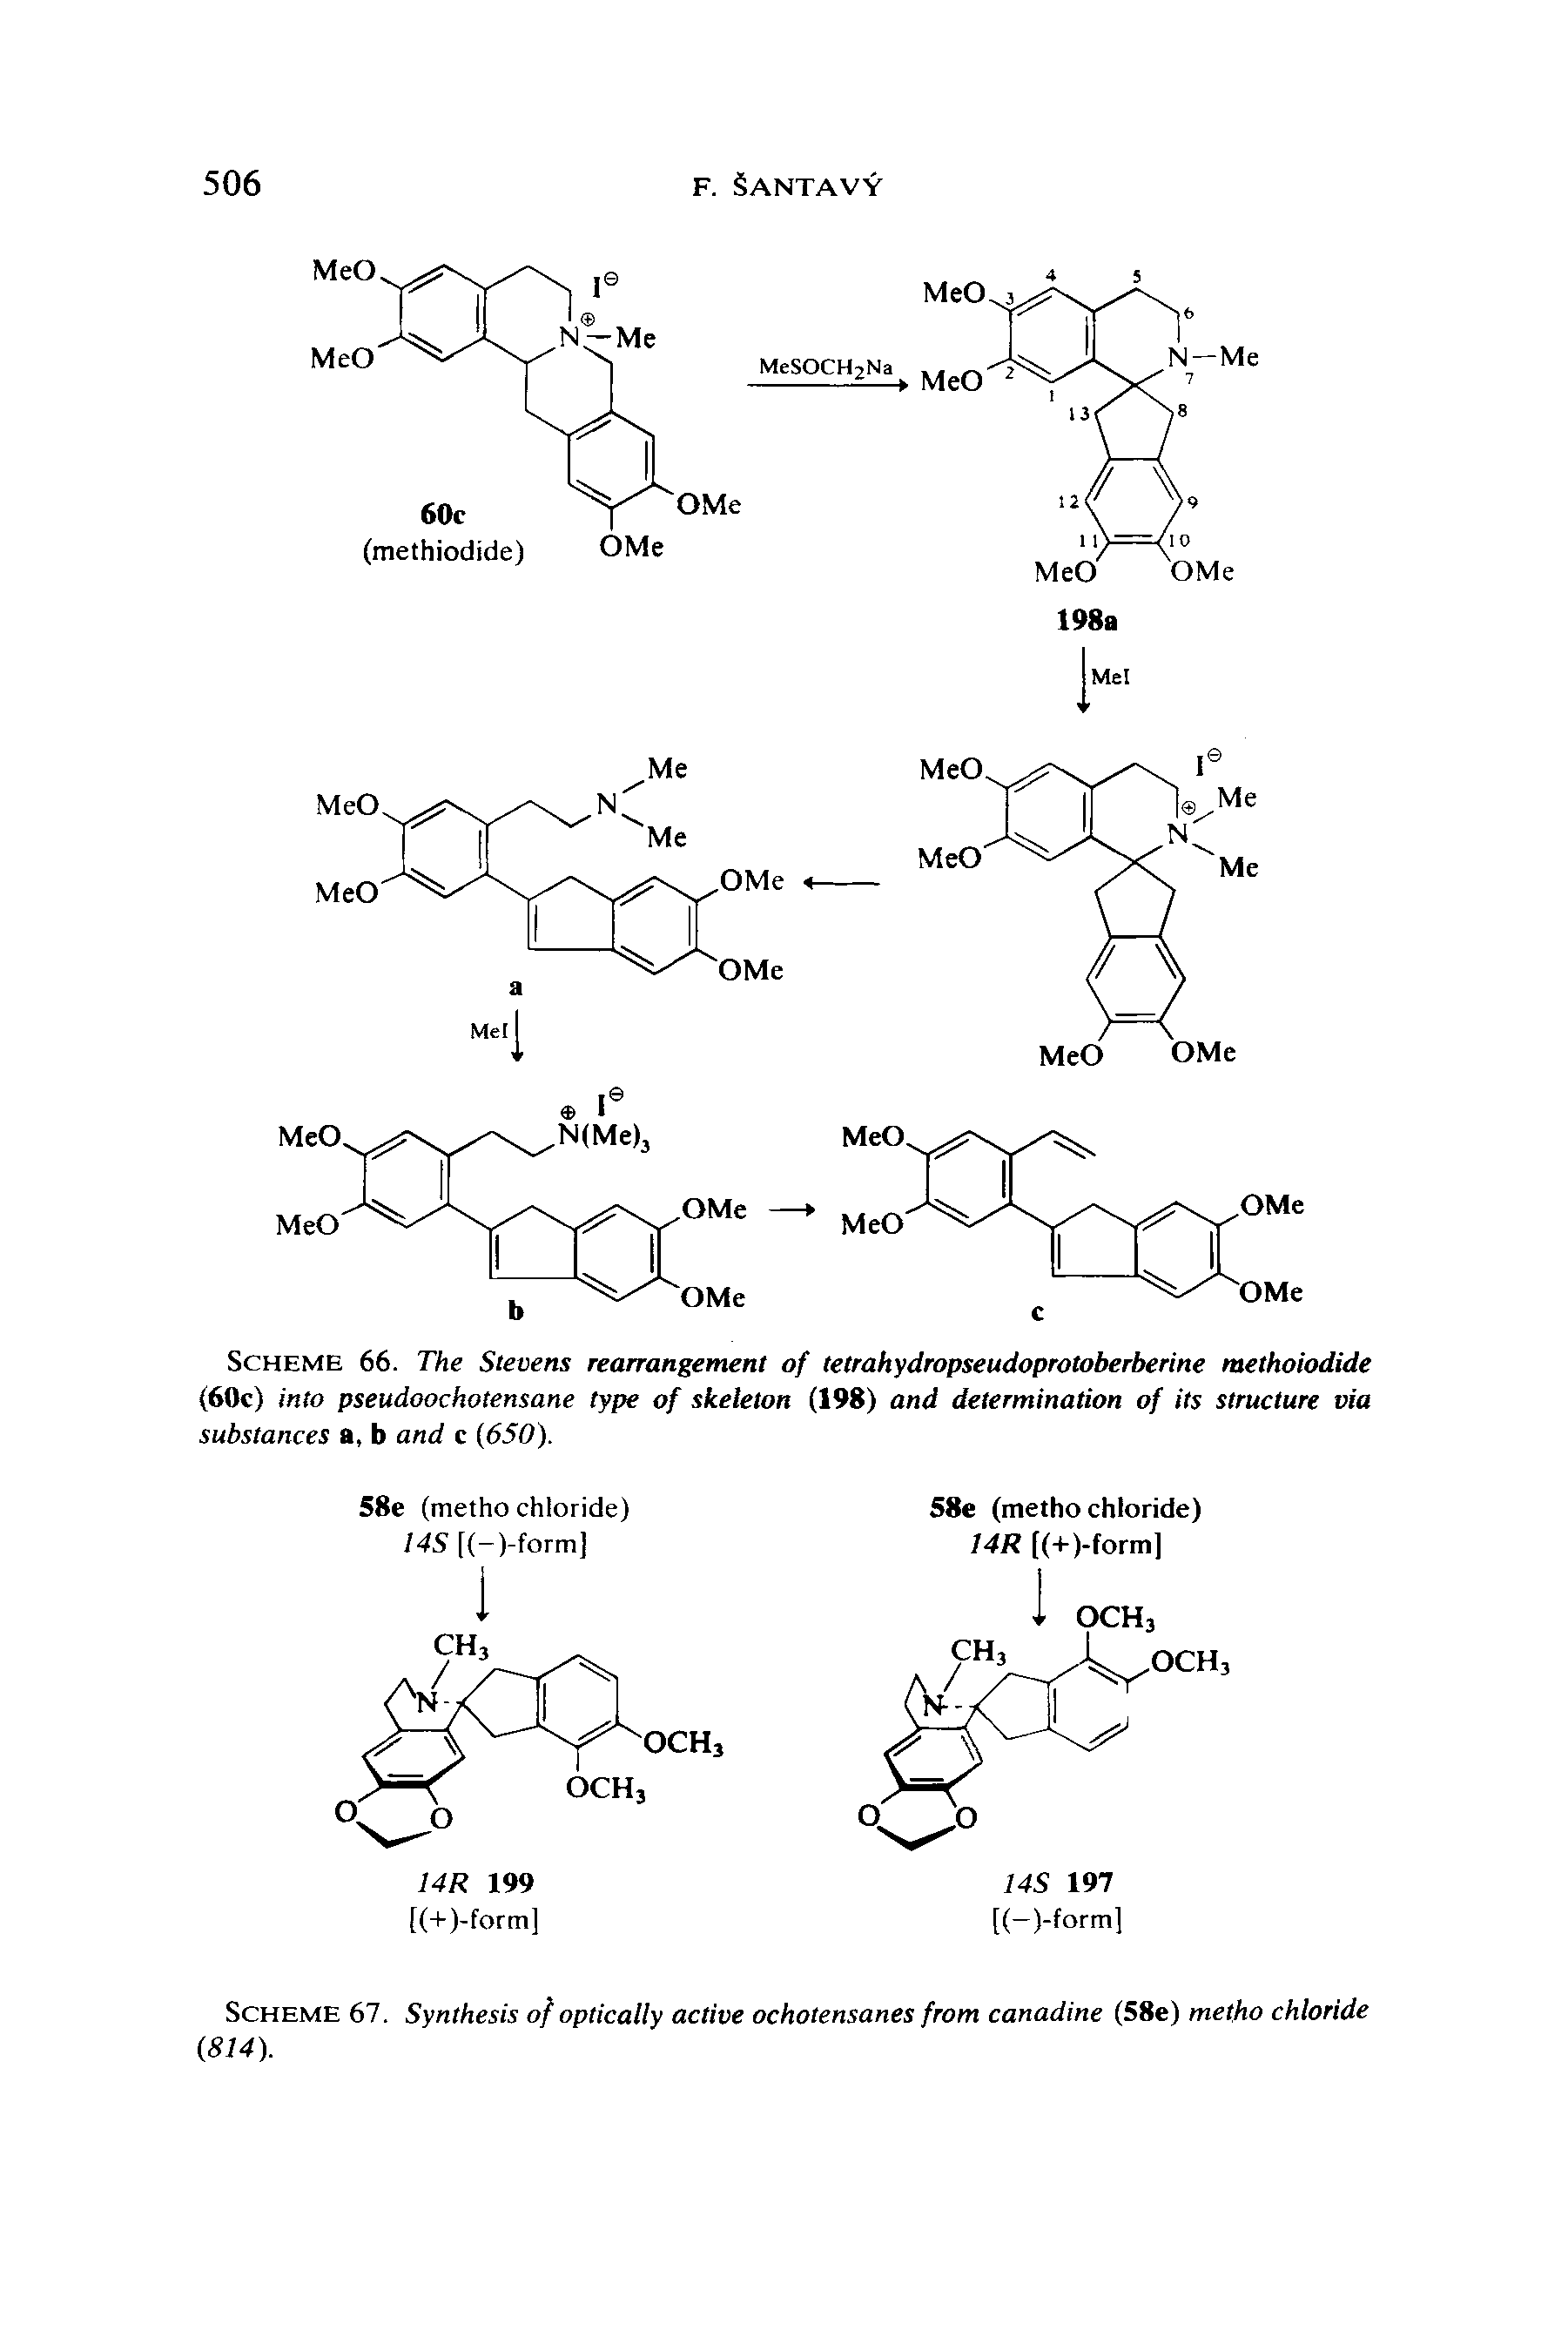 Scheme 67. Synthesis of optically active ochotensanes from canadine (58e) metho chloride (814).